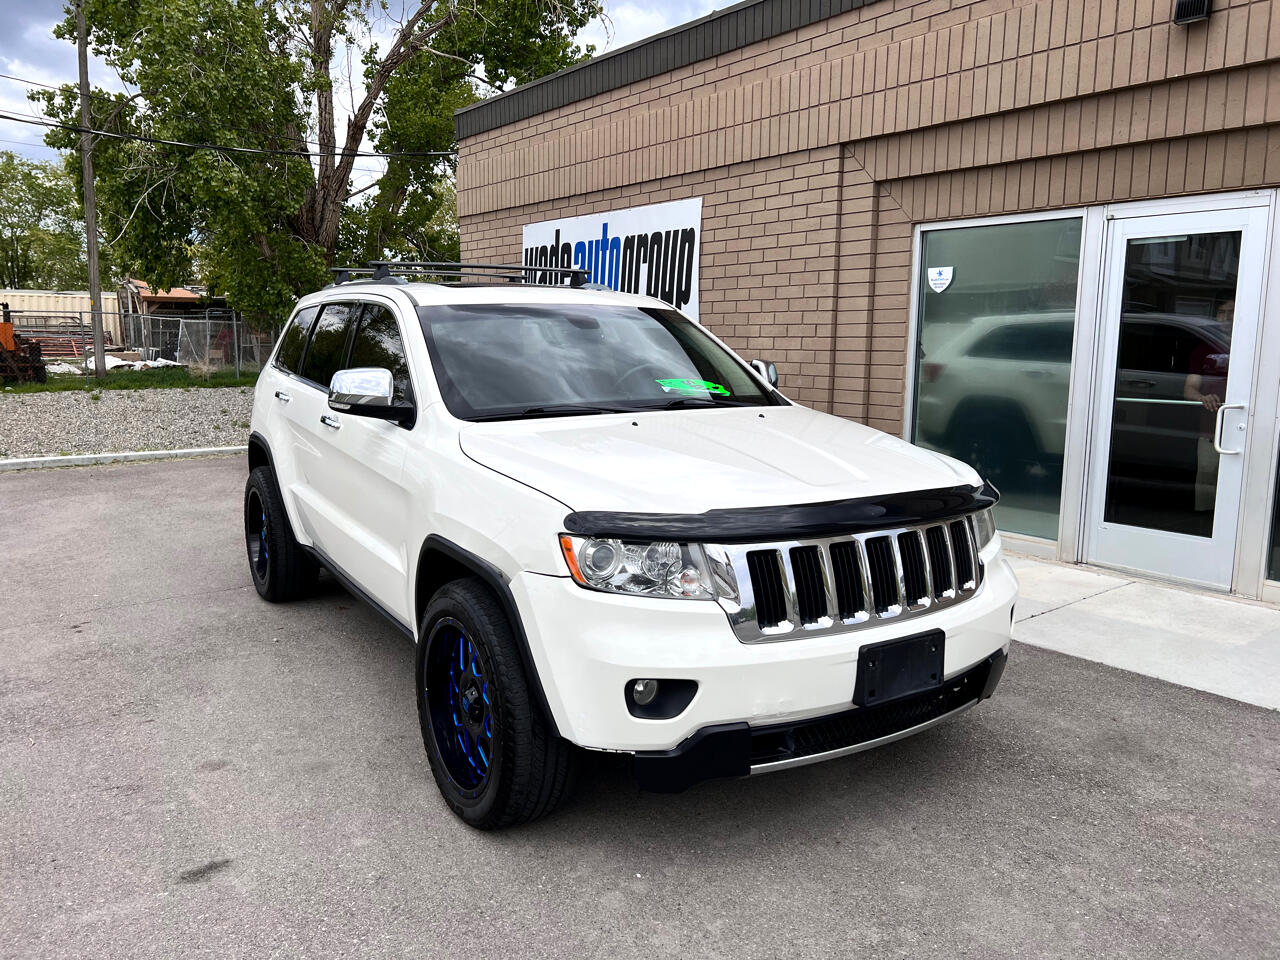 Jeep Grand Cherokee 4WD 4dr Limited 2012